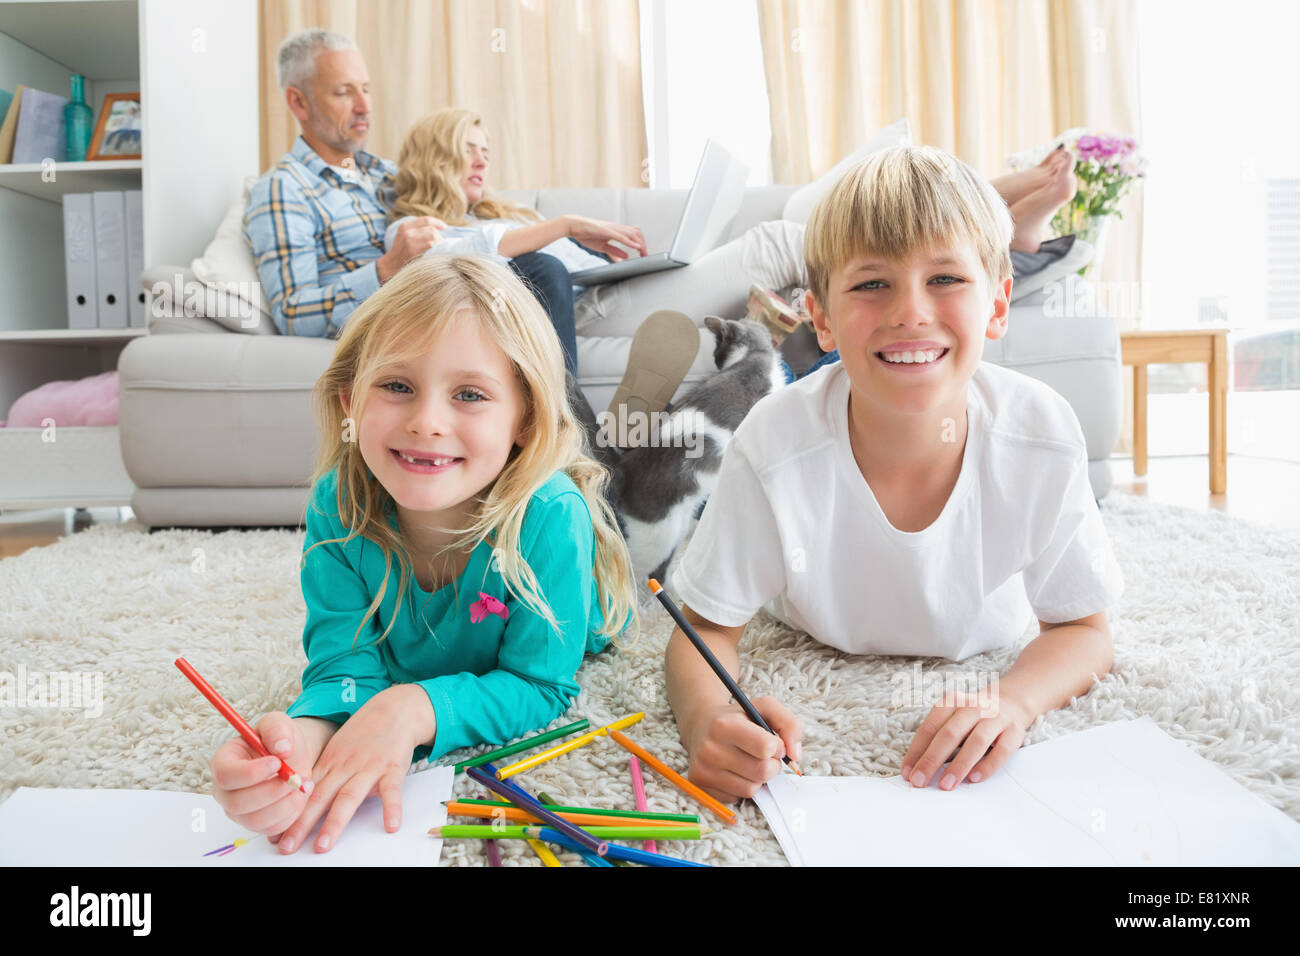 Siblings colouring and drawing on the floor Stock Photo